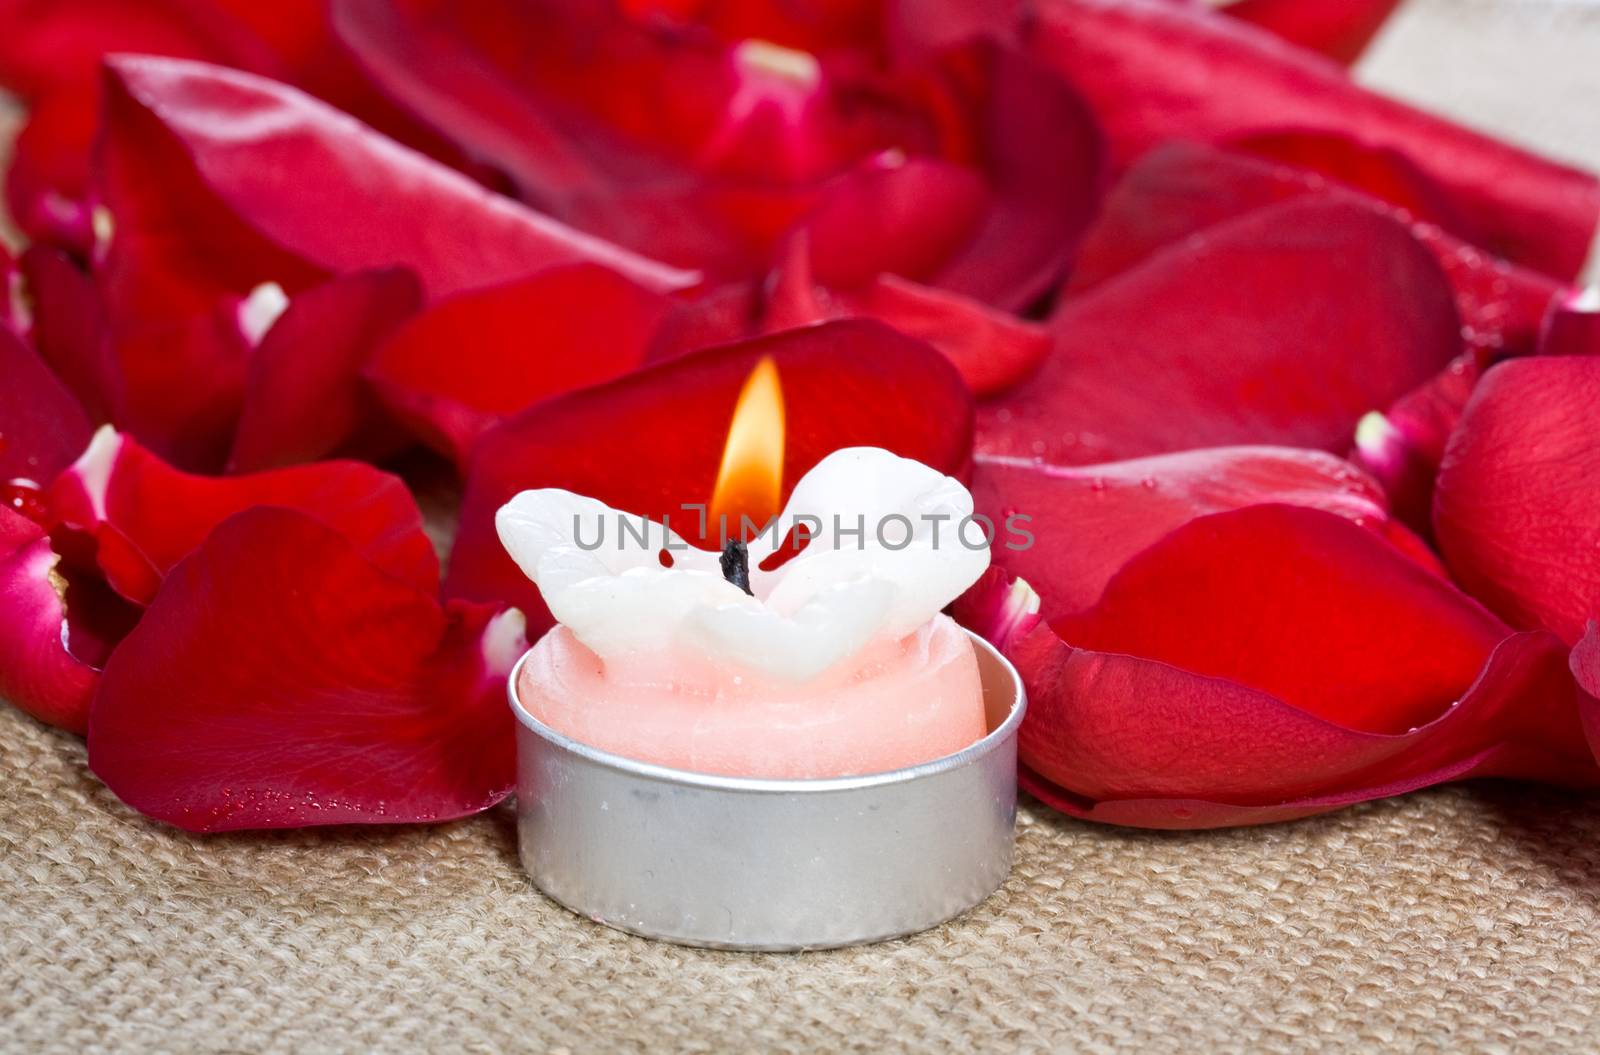 Spa concept. Lighted candleand red rose petals.